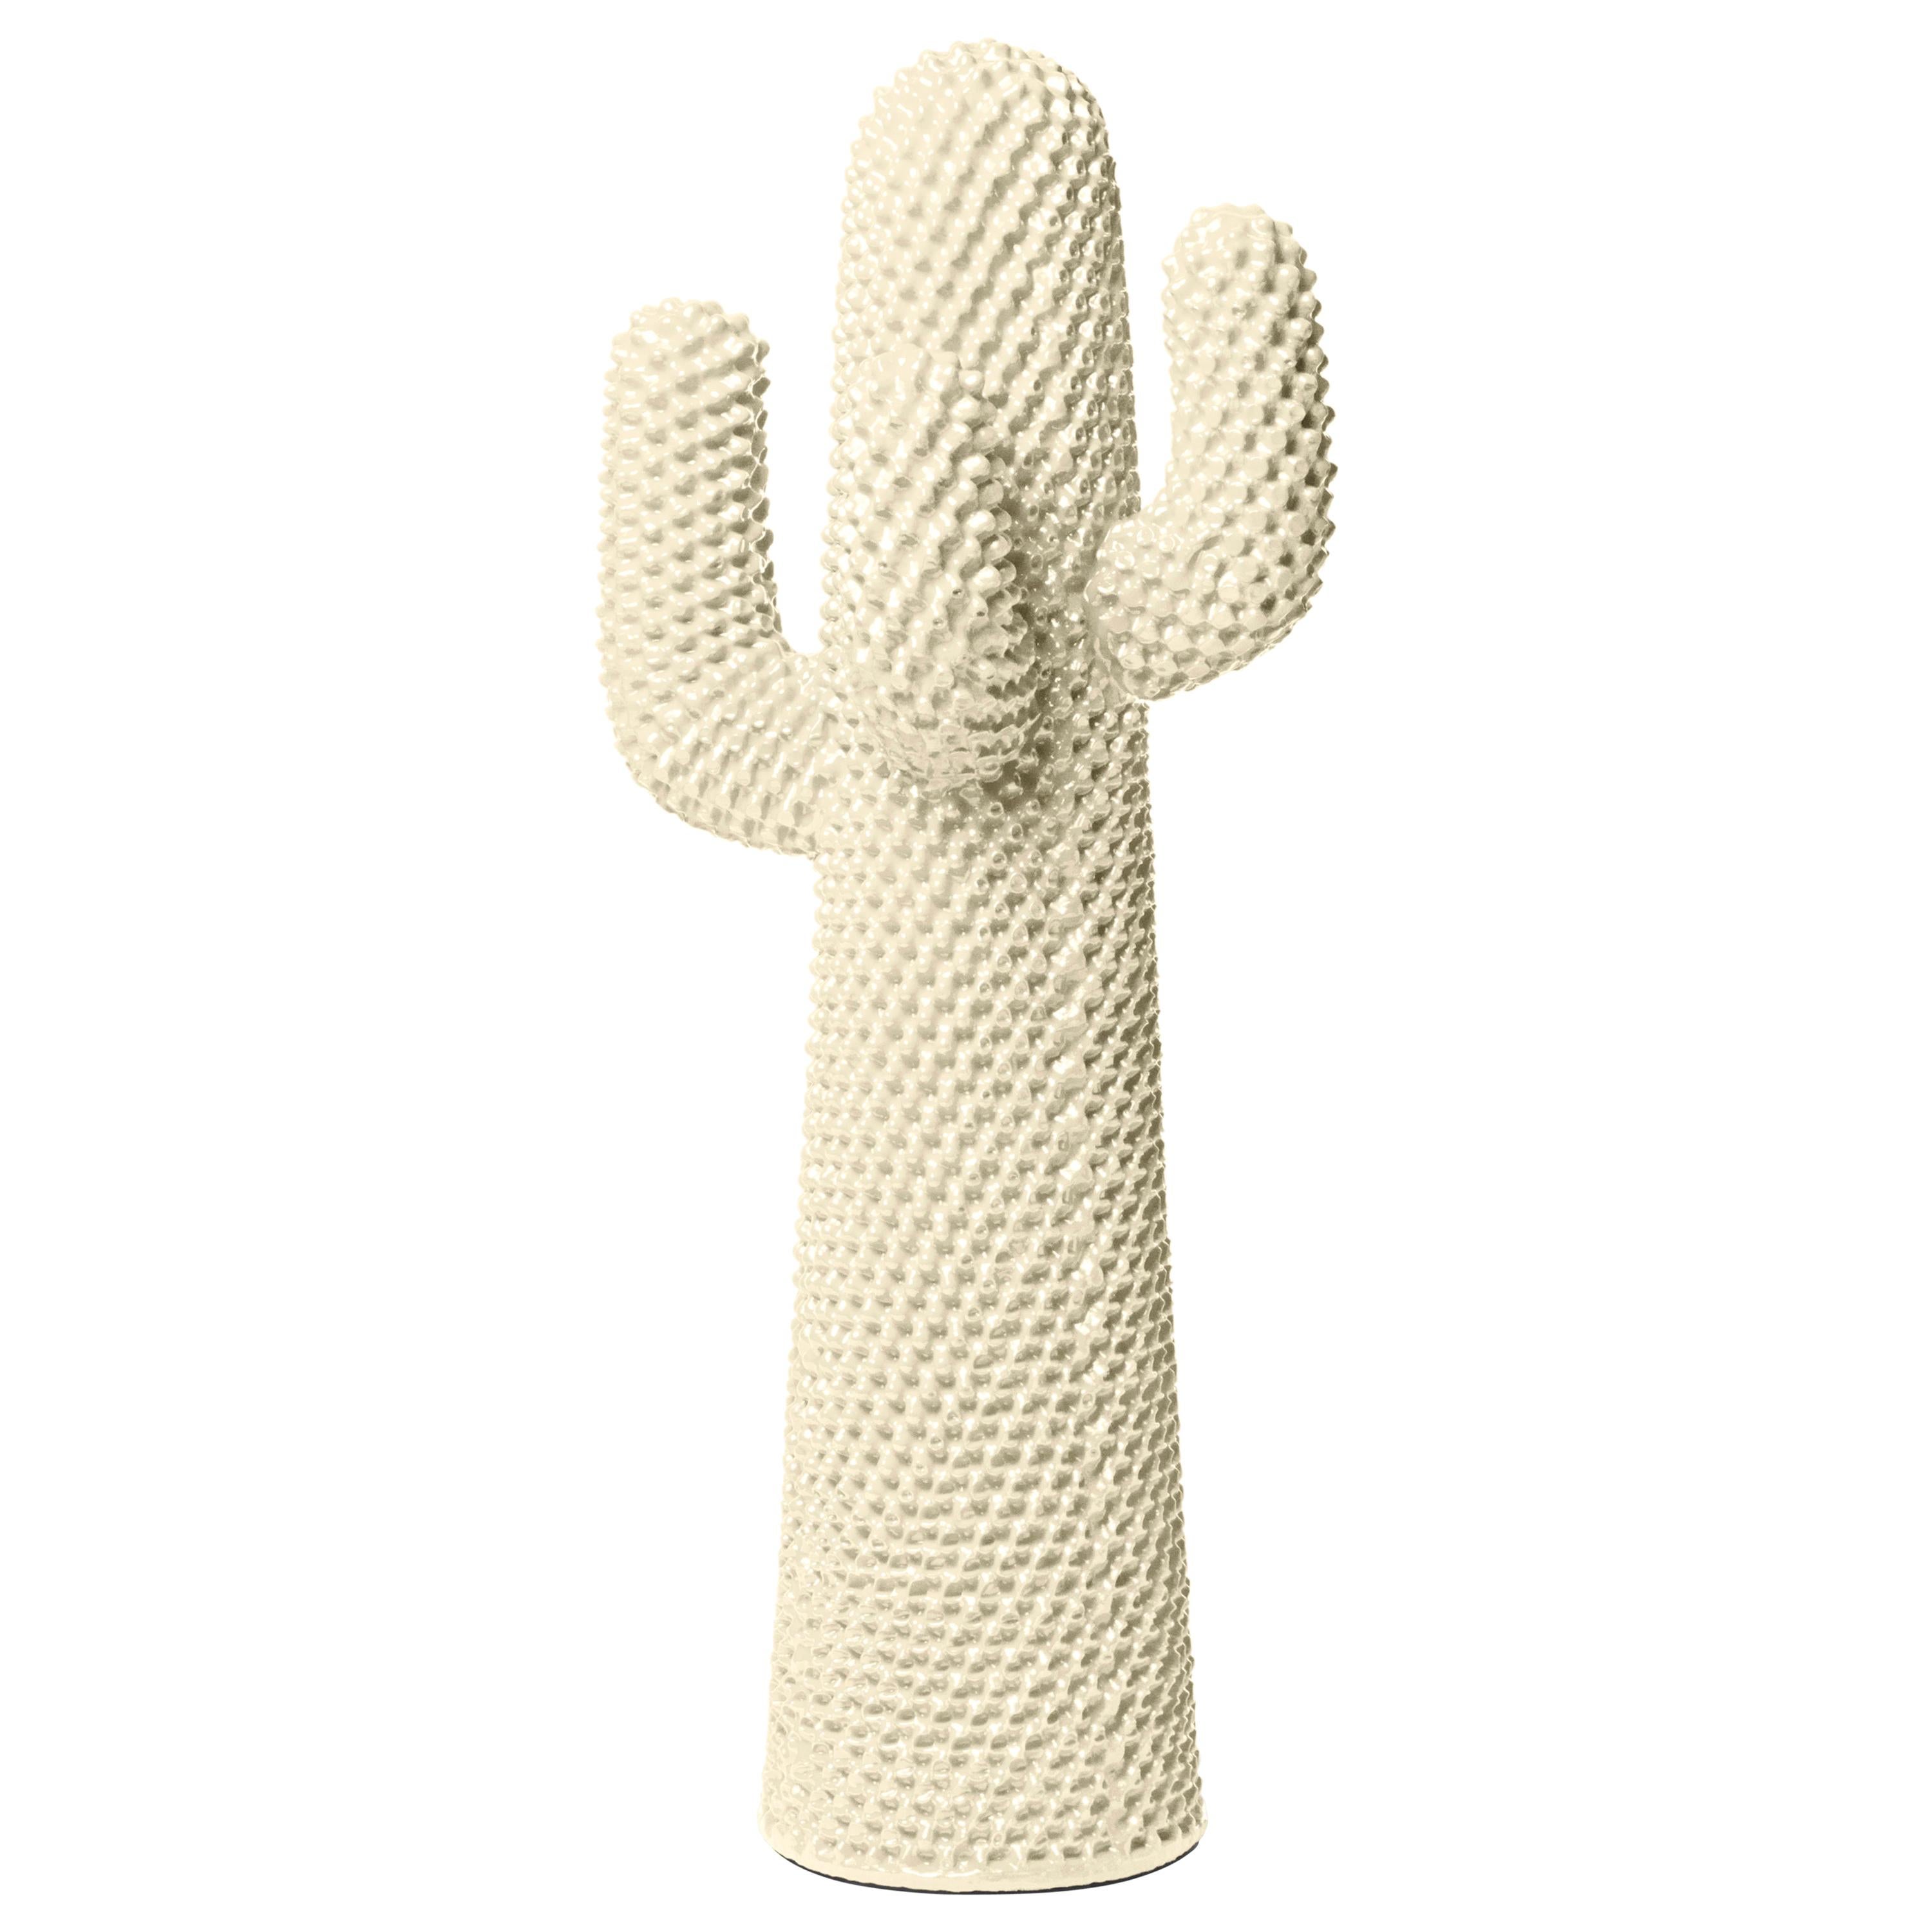 GUFRAM Another White Cactus Sculptural Coatrack by Drocco & Mello